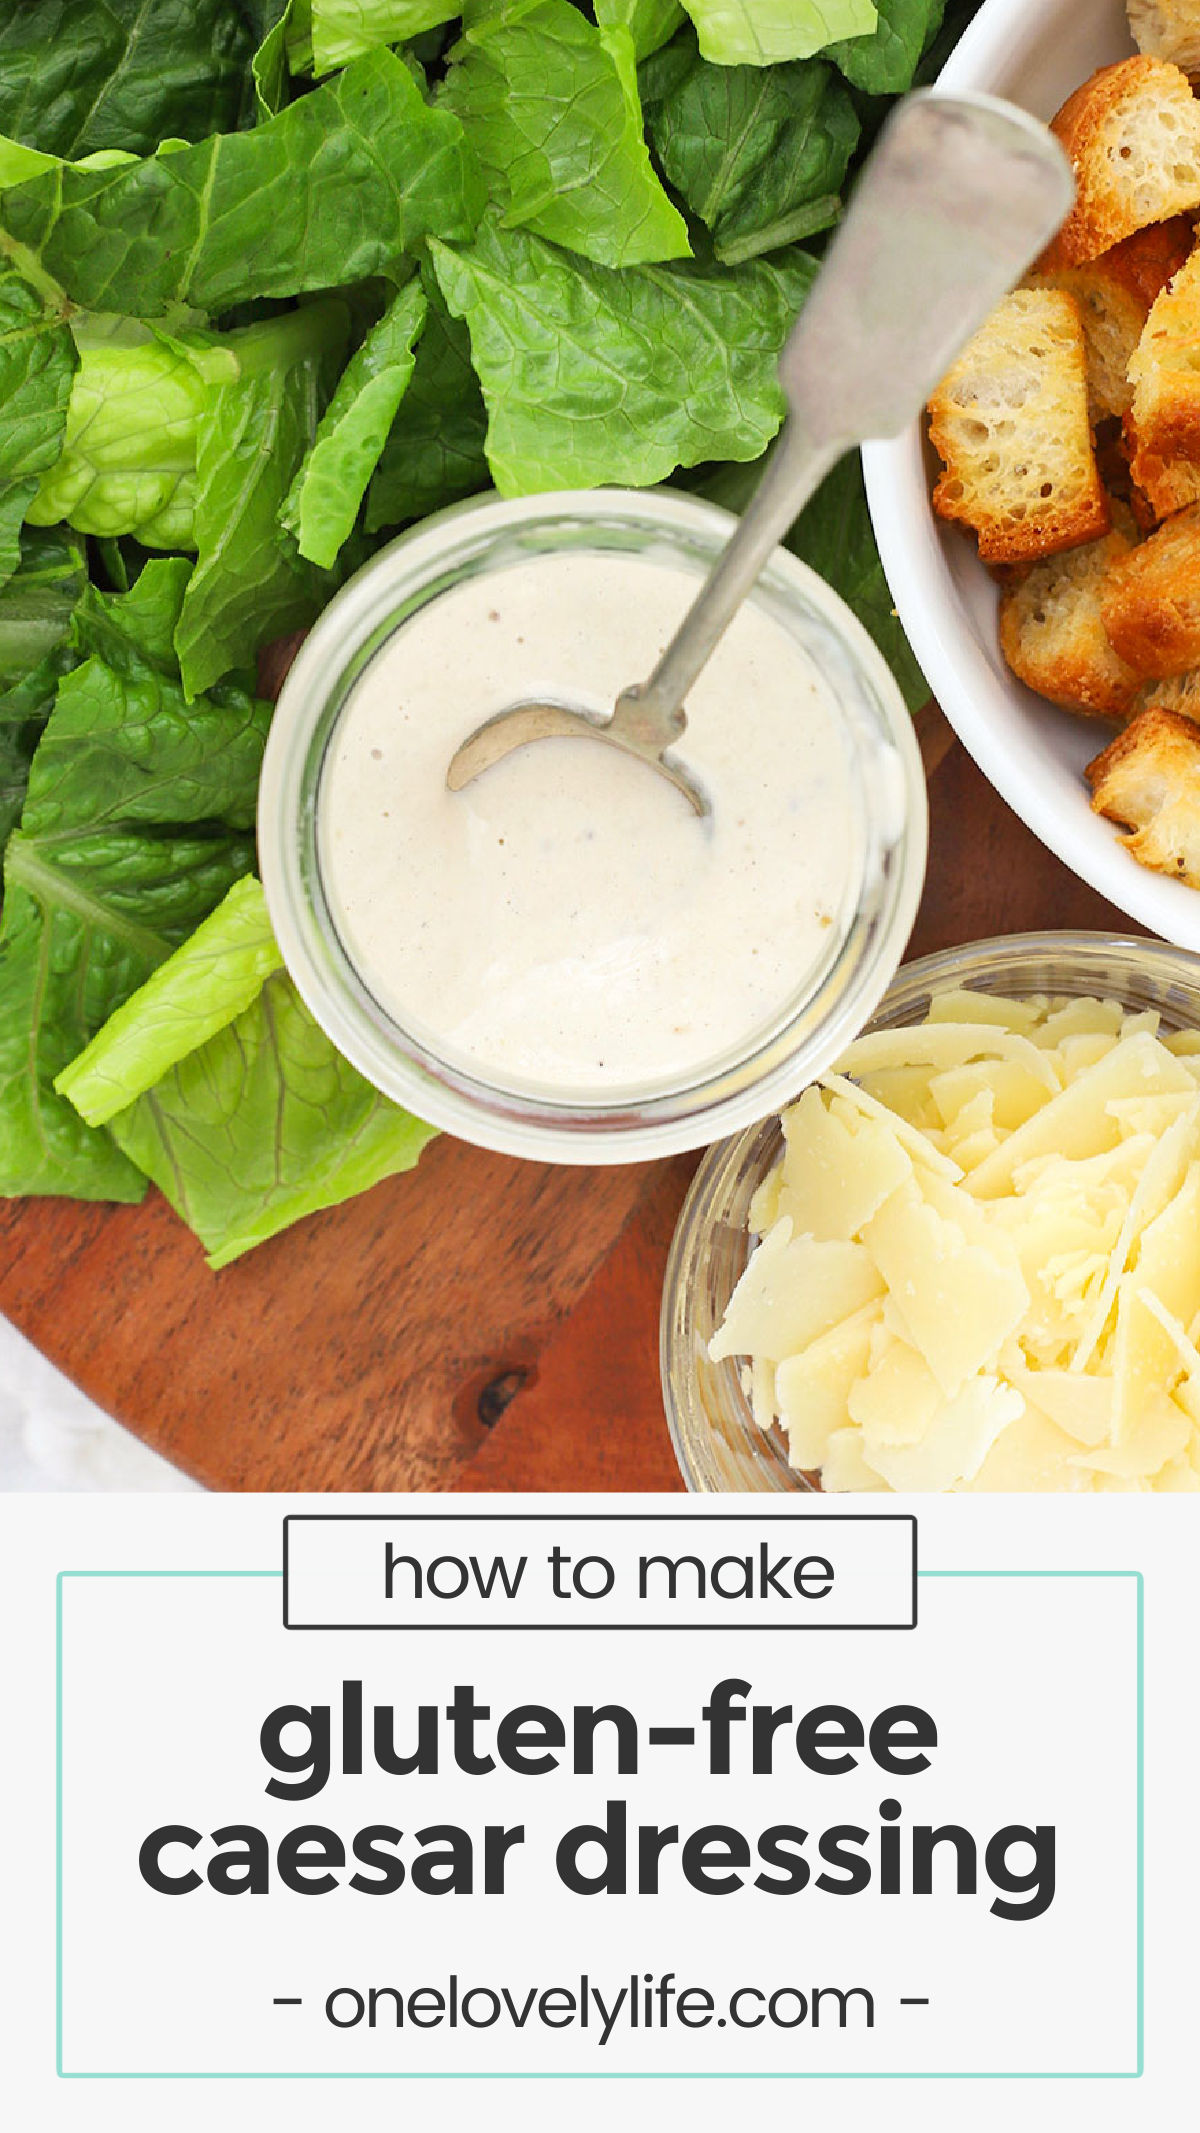 Our Easy Caesar Dressing recipe is perfect for weeknight salads, wraps, and more. No anchovy paste required! (Gluten-Free) // Caesar salad dressing without anchovies / caesar dressing without anchovy paste / homemade caesar dressing / caesar salad dressing from scratch / homemade salad dressing / side salad dressing / parmesan salad dressing / caesar salad dressing no anchovy paste / gluten free salad dressing